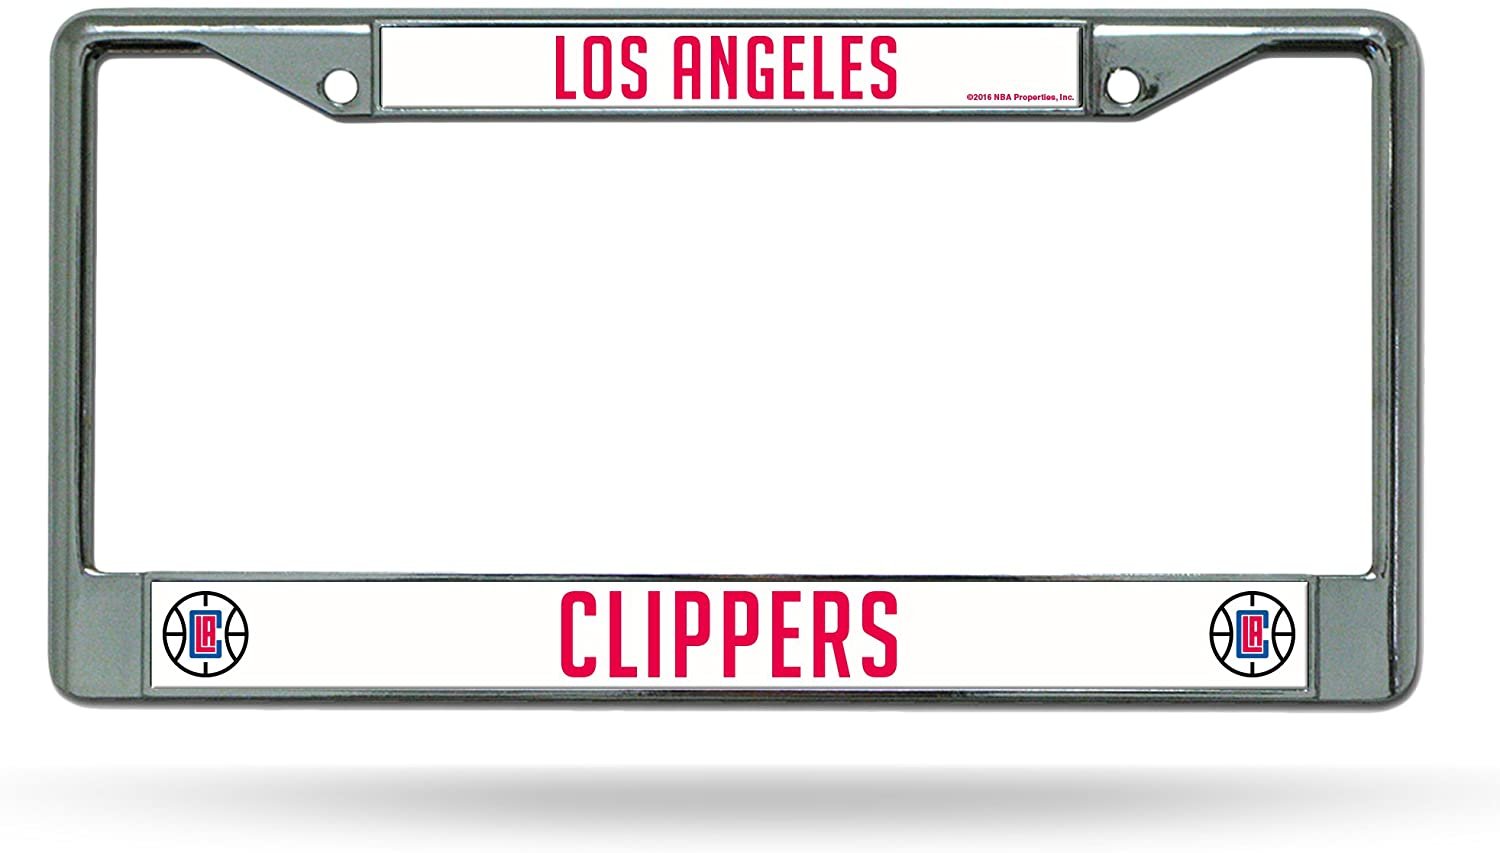 Los Angeles Clippers Premium Metal License Plate Frame Chrome Tag Cover, 12x6 Inch